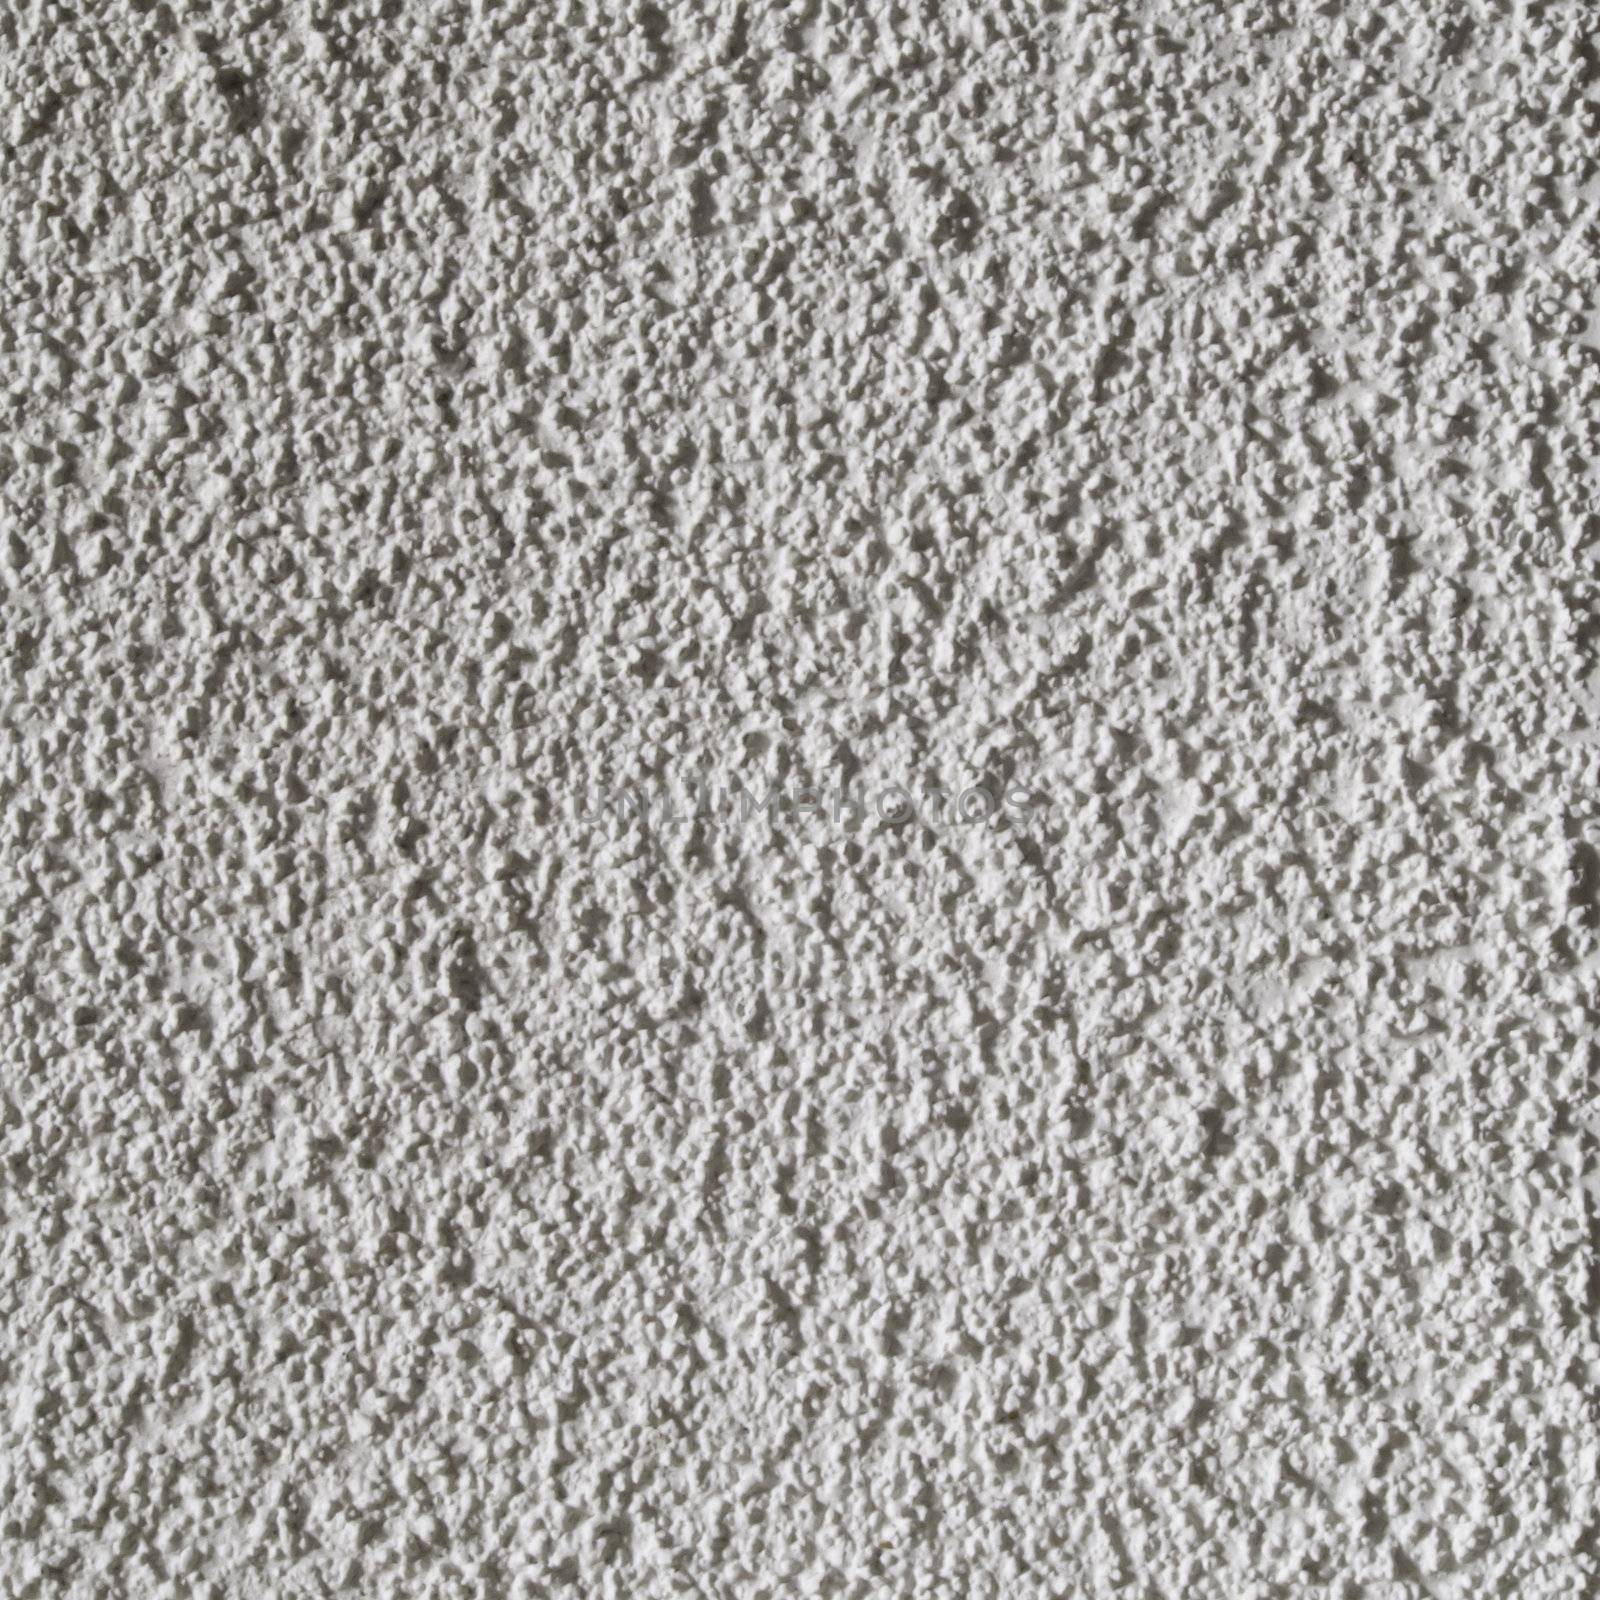 Stucco texture of stone concrete wall  by siraanamwong